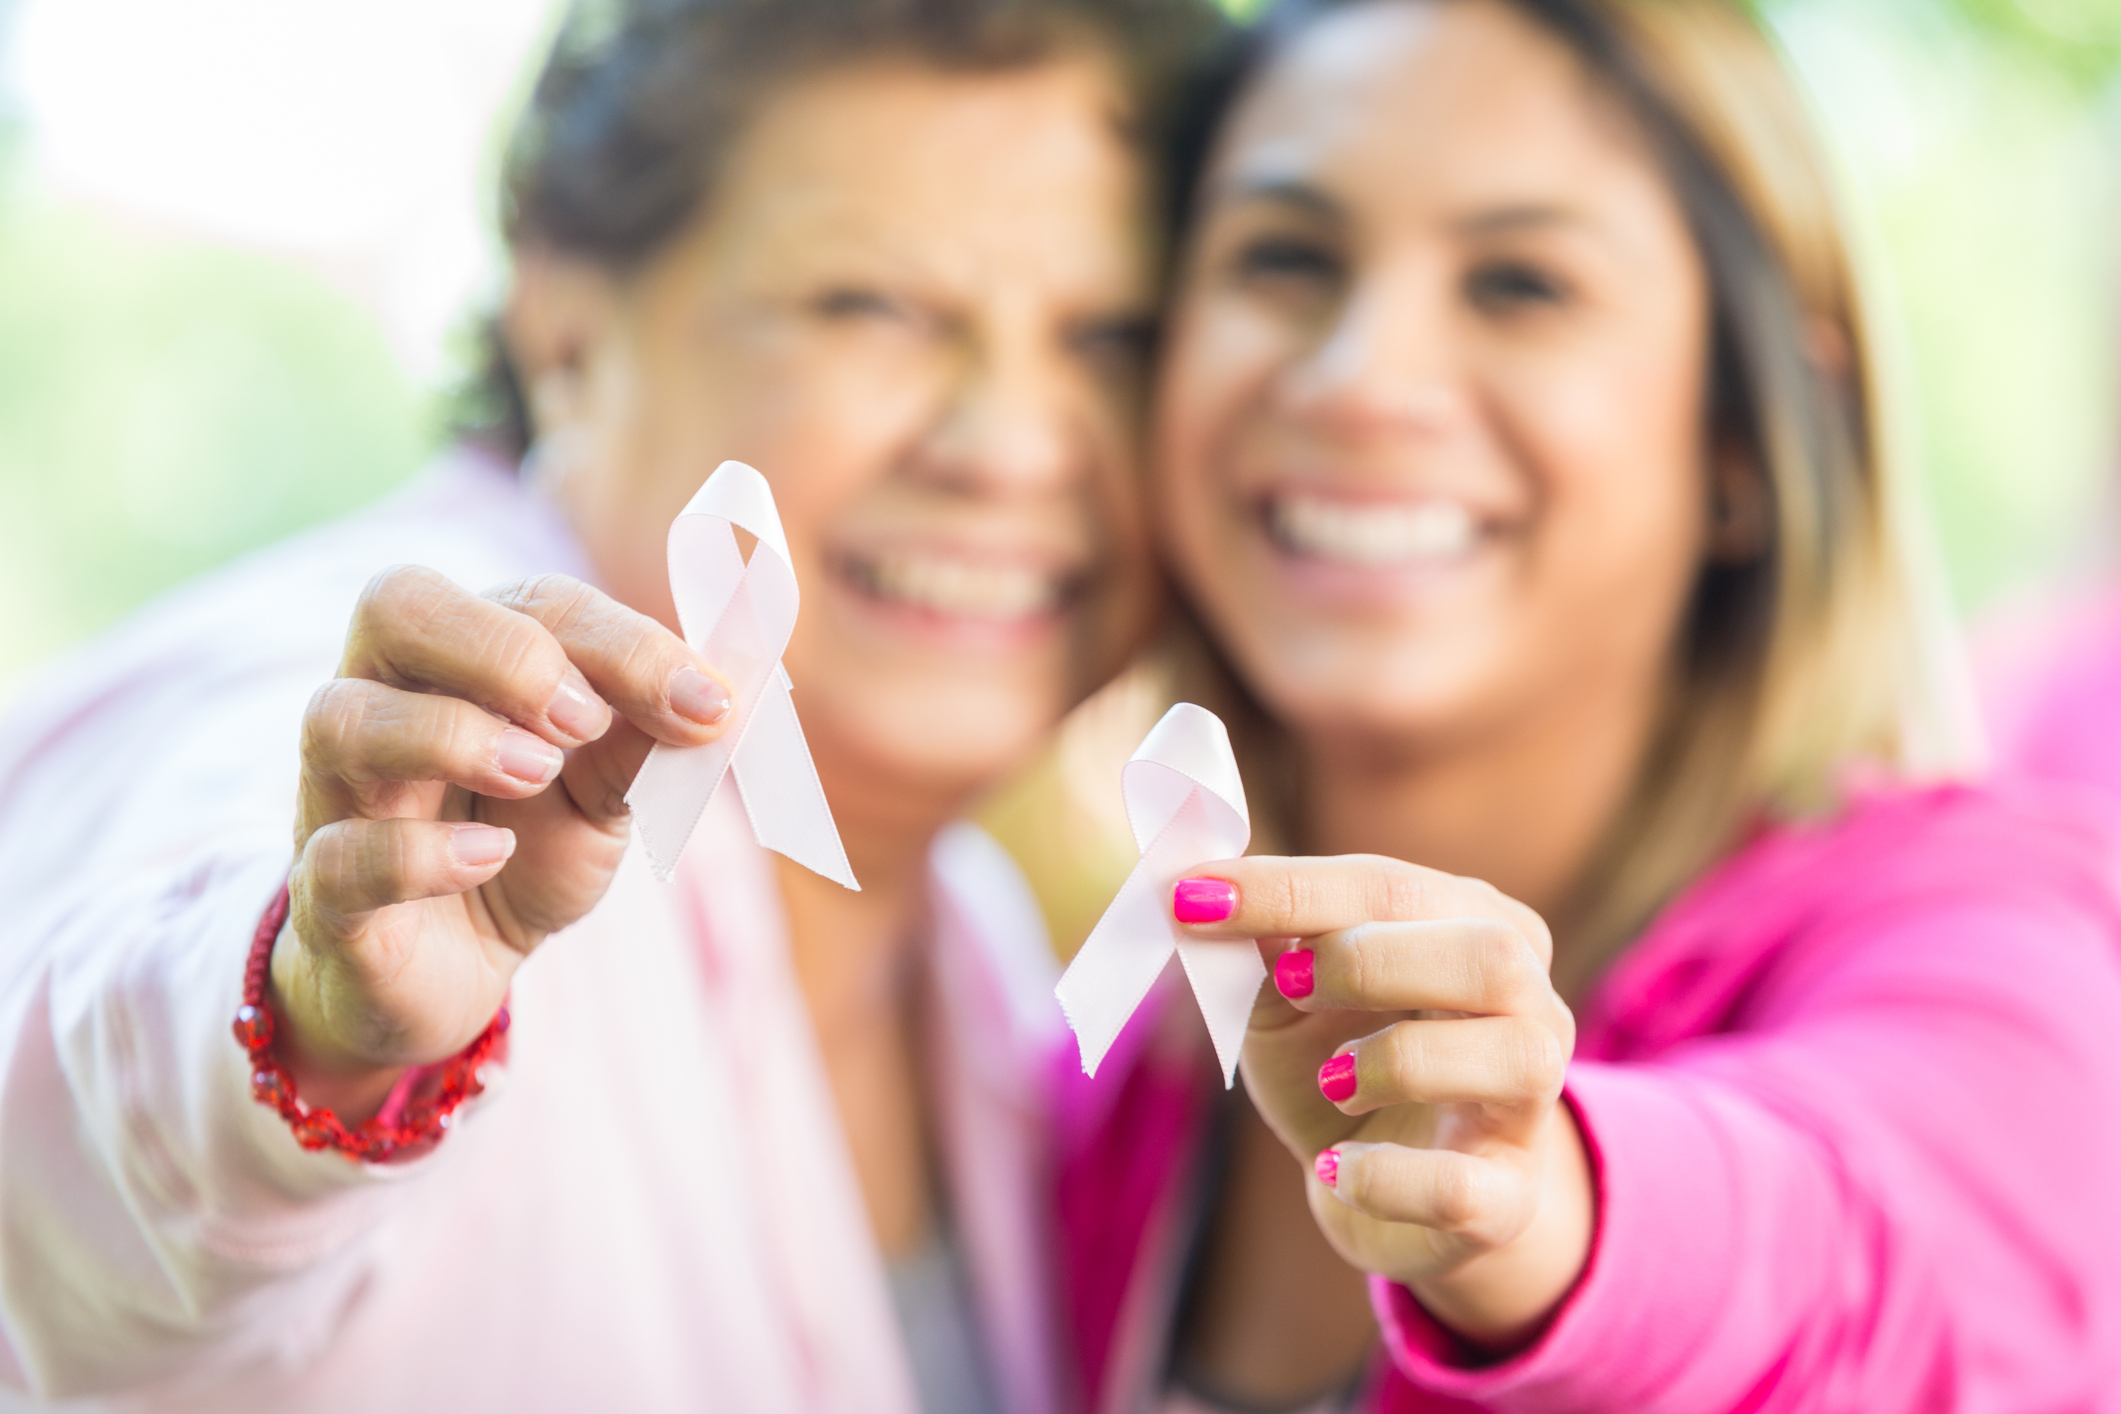 Senior Hispanic woman and adult daughter smile and hold up pink breast cancer awareness ribbons